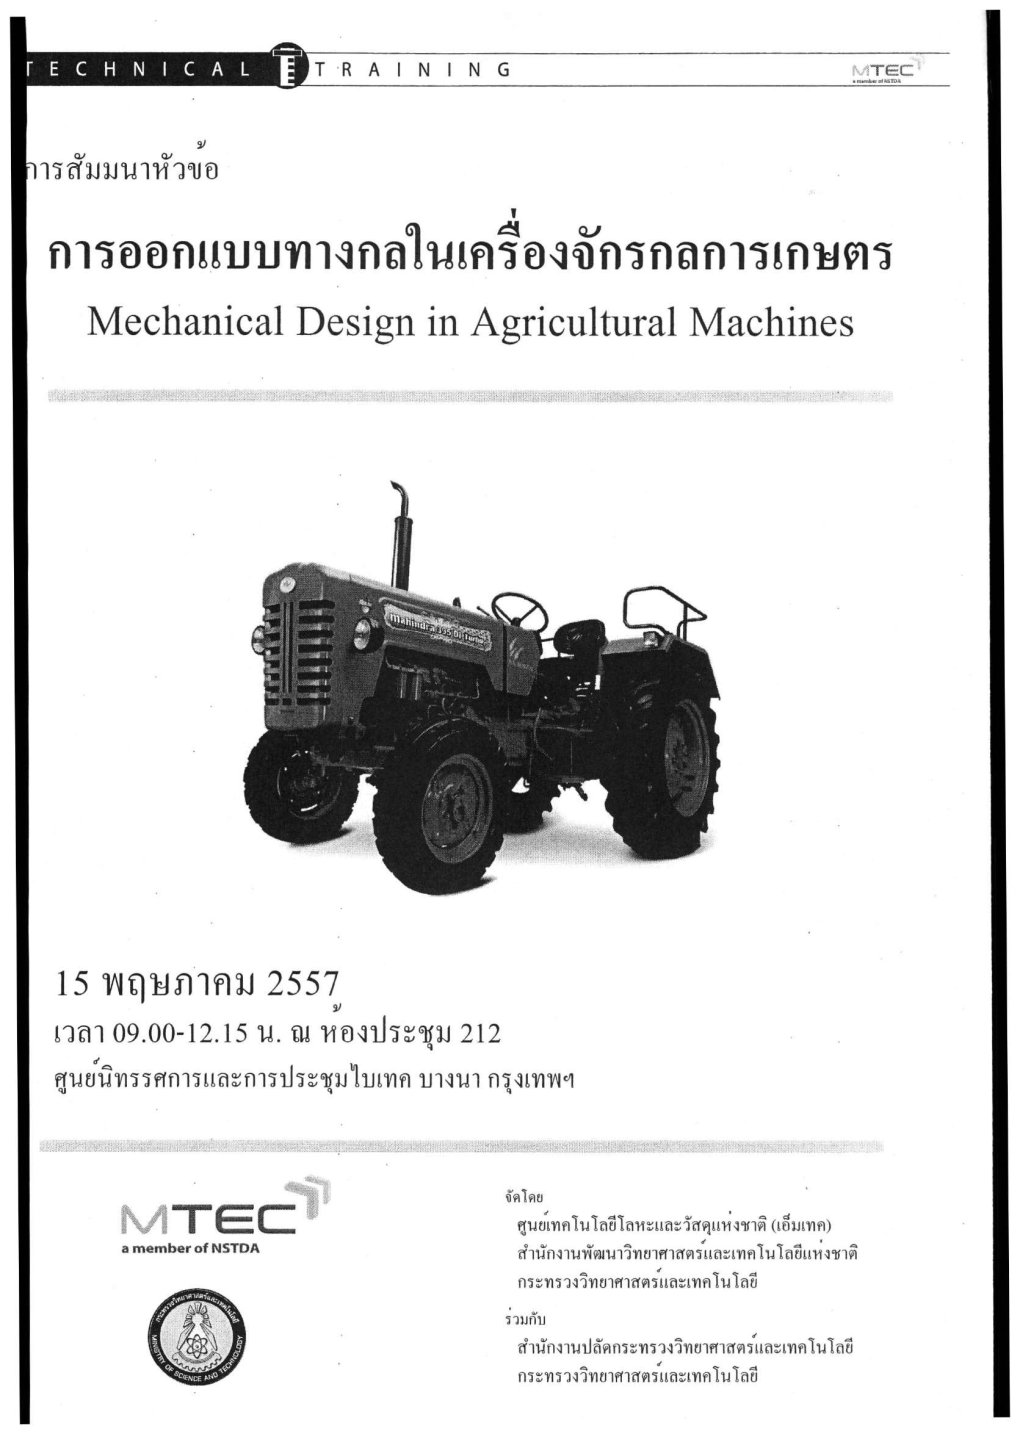 Mechanical Design in Agricultural Machines